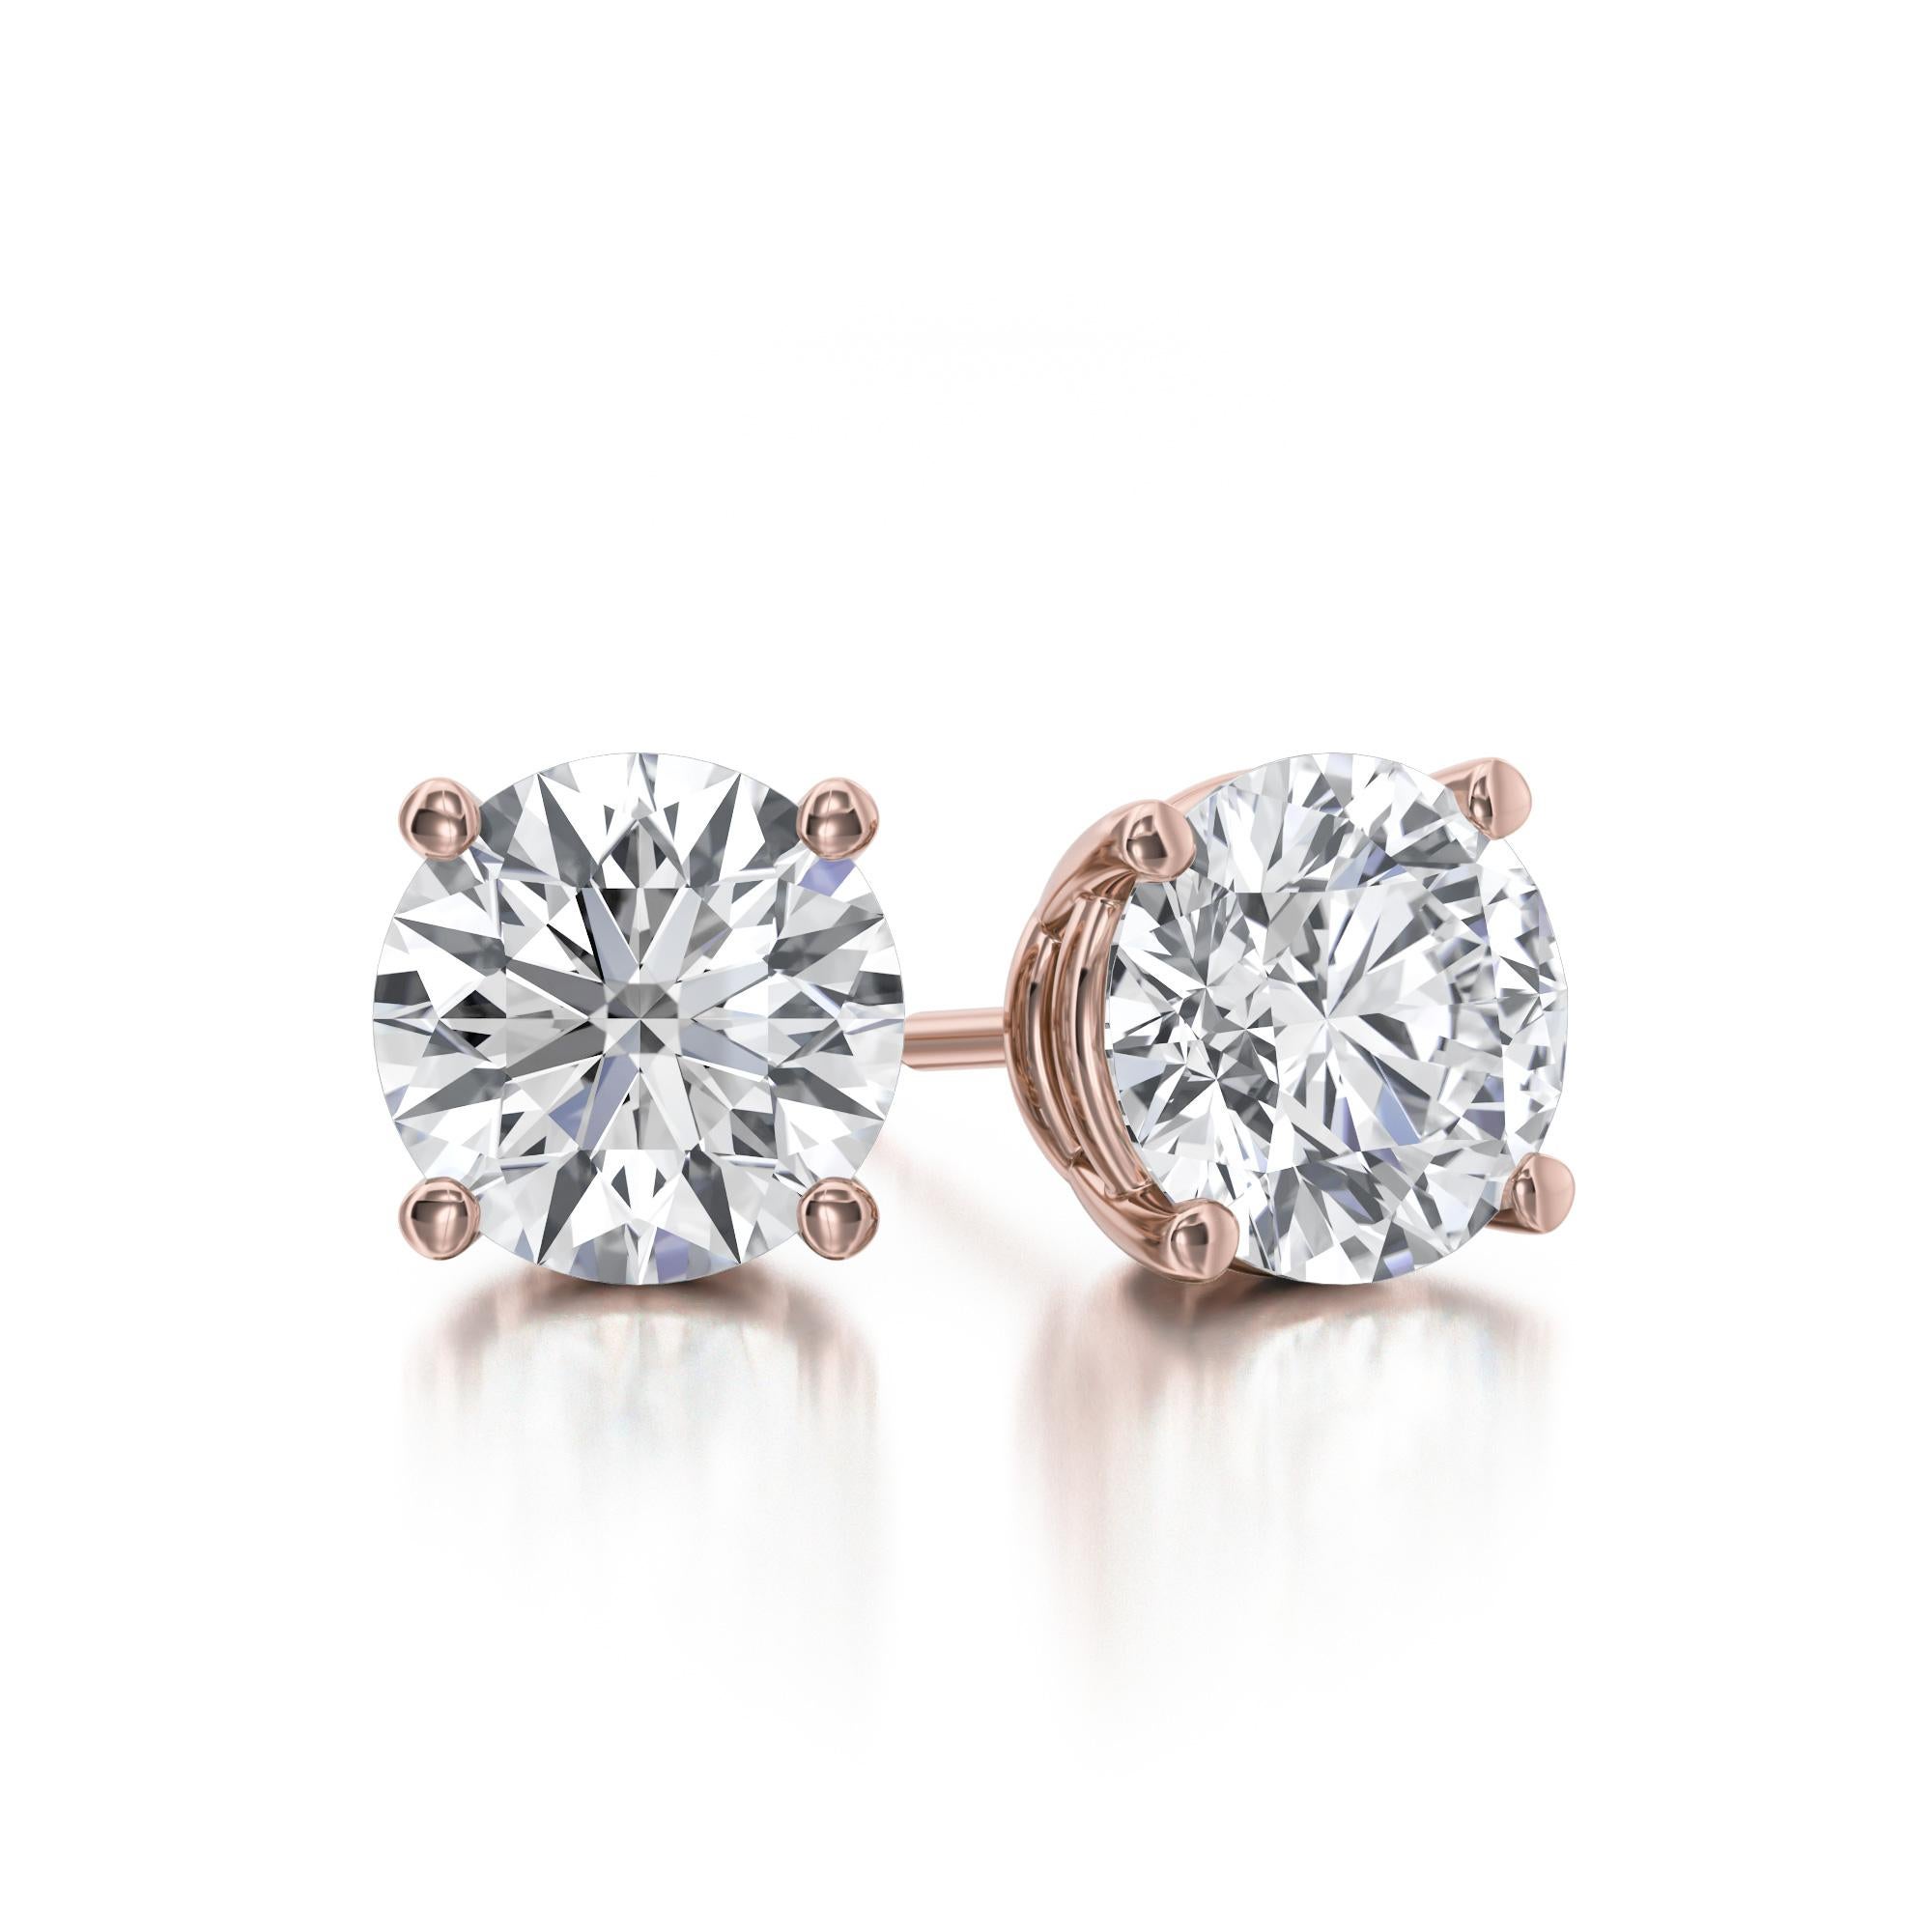 Classic Four Prong Diamond Stud Earrings, featuring:
✧ 2 natural diamonds H color SI clarity weighing 1.00+ carats 
✧ Measurements: 5.00mm*5.00mm
✧ Available in 18K Rose Gold
✧ Push back friction closure
✧ Free appraisal included with your